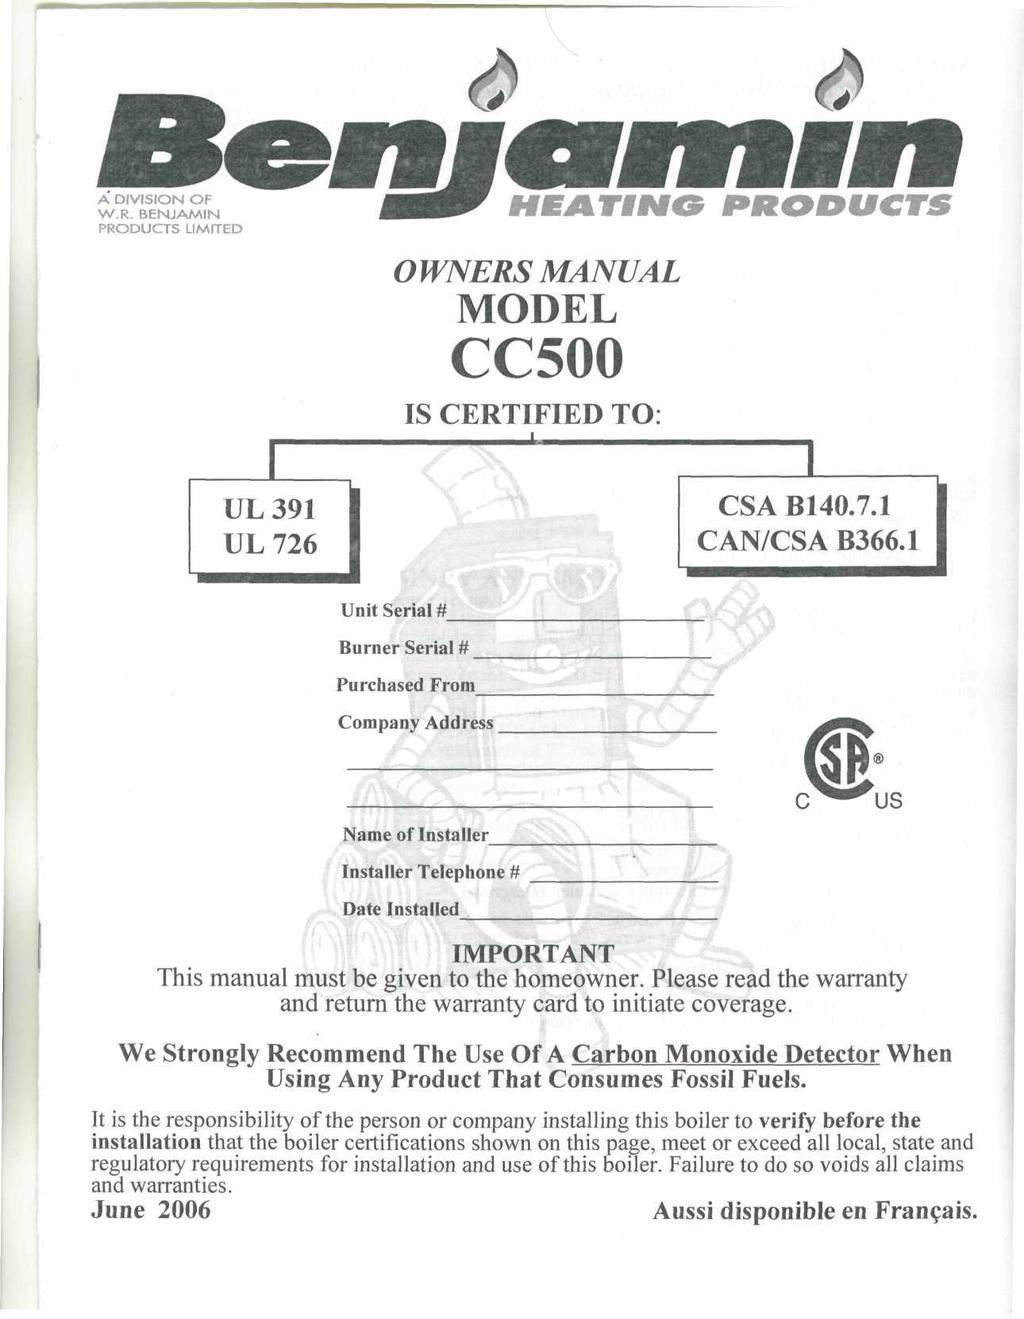 A DIVISION OF W.R. BENJAMIN PRODUCTS LIMITED UL391 UL726 HEATING PRODUCTS OWNERS MANUAL MODEL CC500 IS CERTIFIED TO: 1 CSA B140.7.1 CAN/CSA B366.